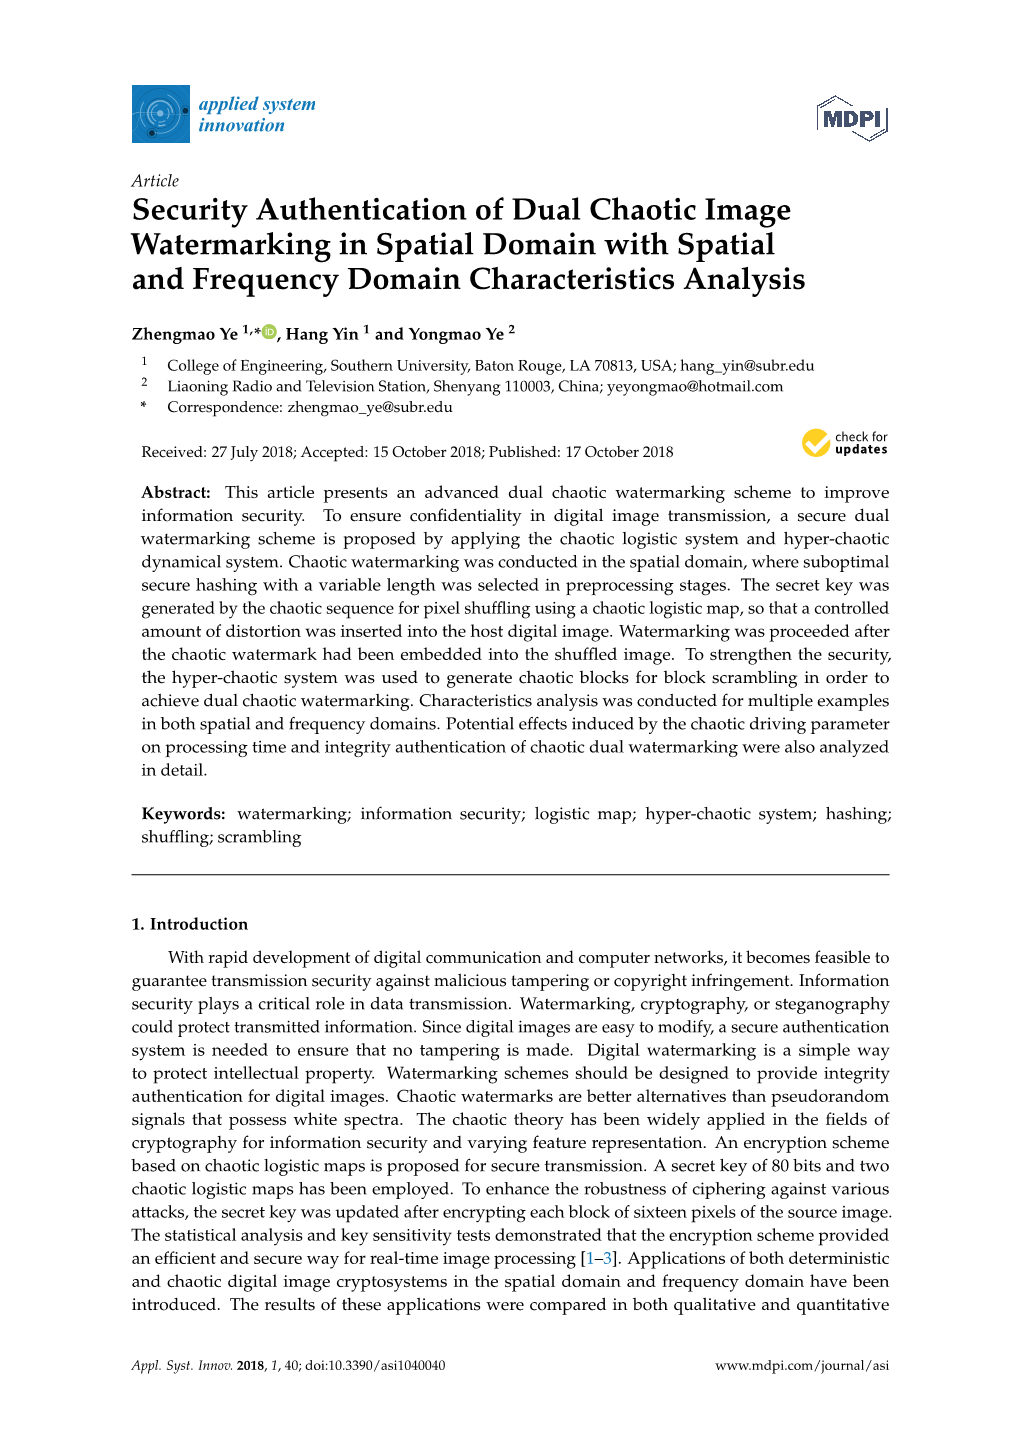 Security Authentication of Dual Chaotic Image Watermarking in Spatial Domain with Spatial and Frequency Domain Characteristics Analysis